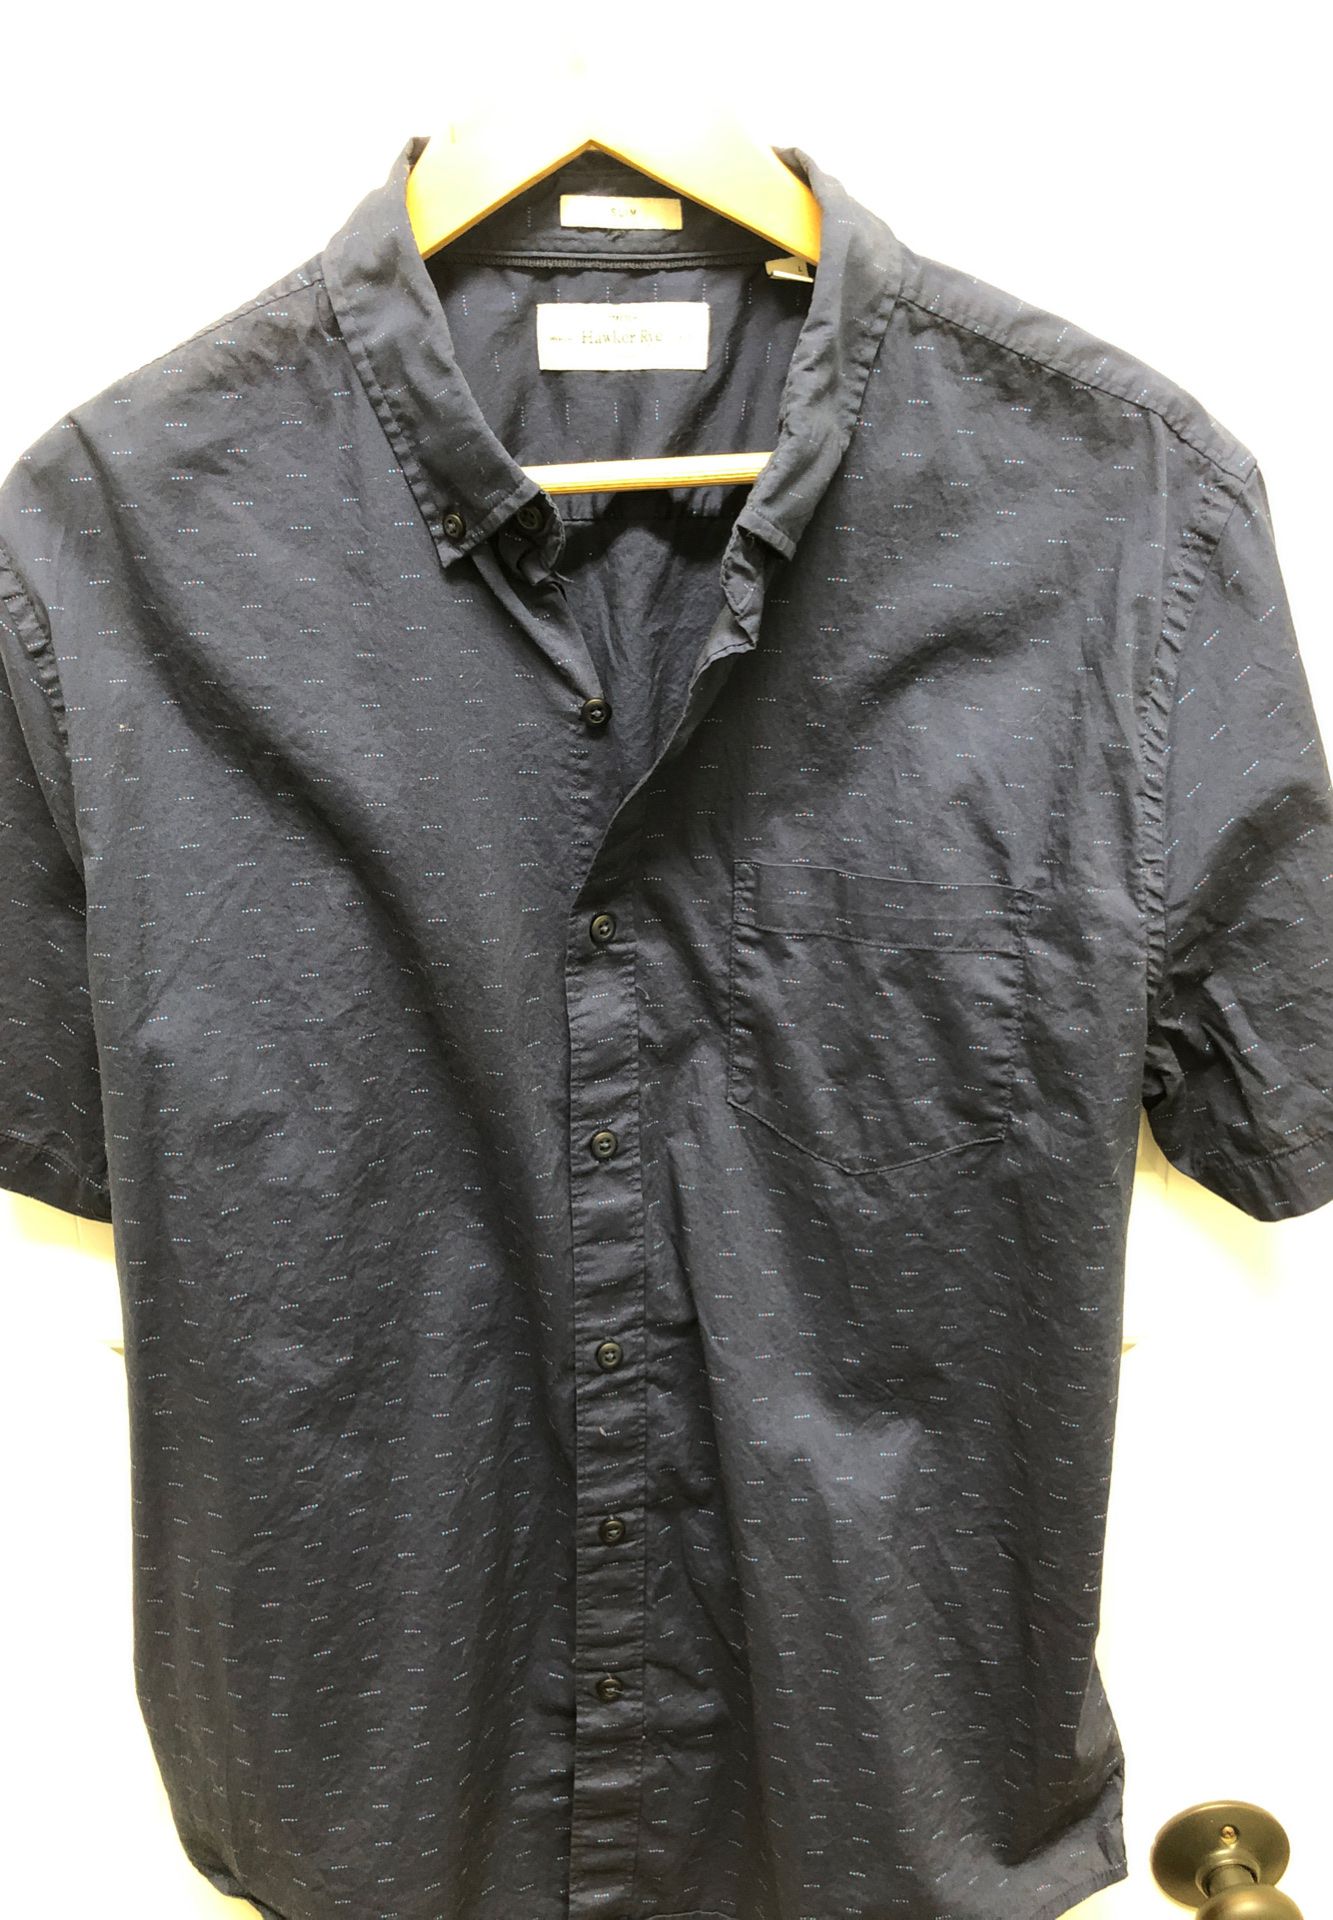 Hawker Rye (men’s large) Button Up Shirt